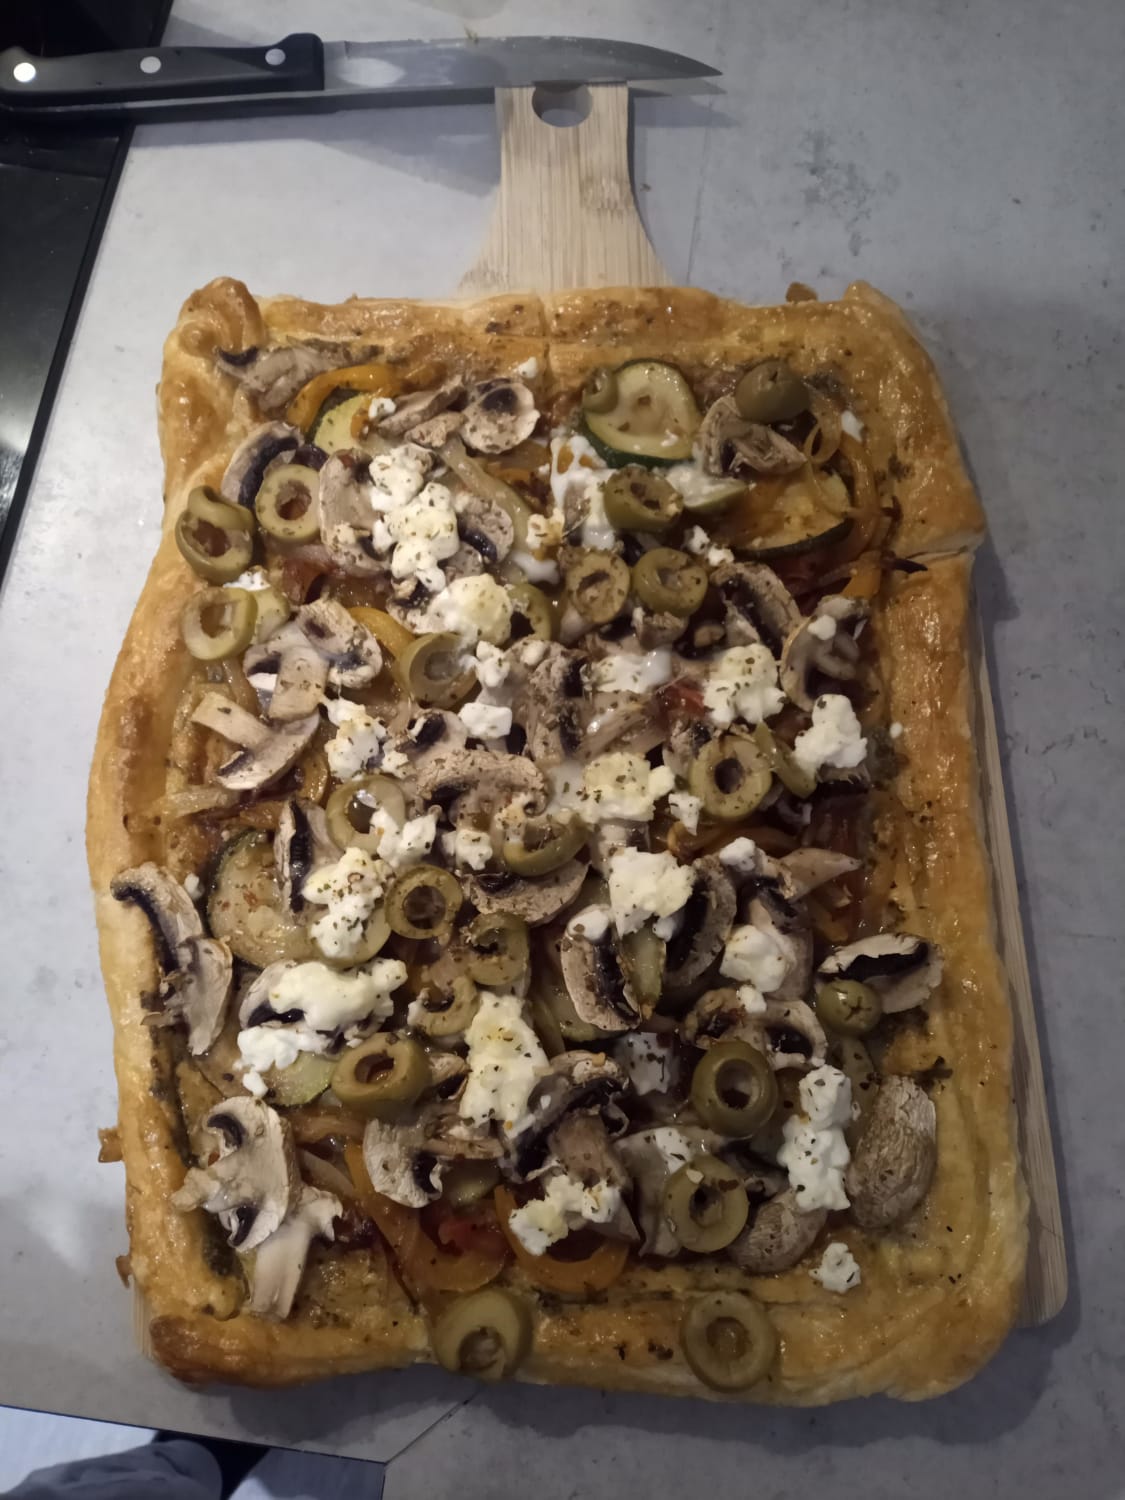 Roasted mixed vegetable and Feta Tart for my tomorrow's hike :)